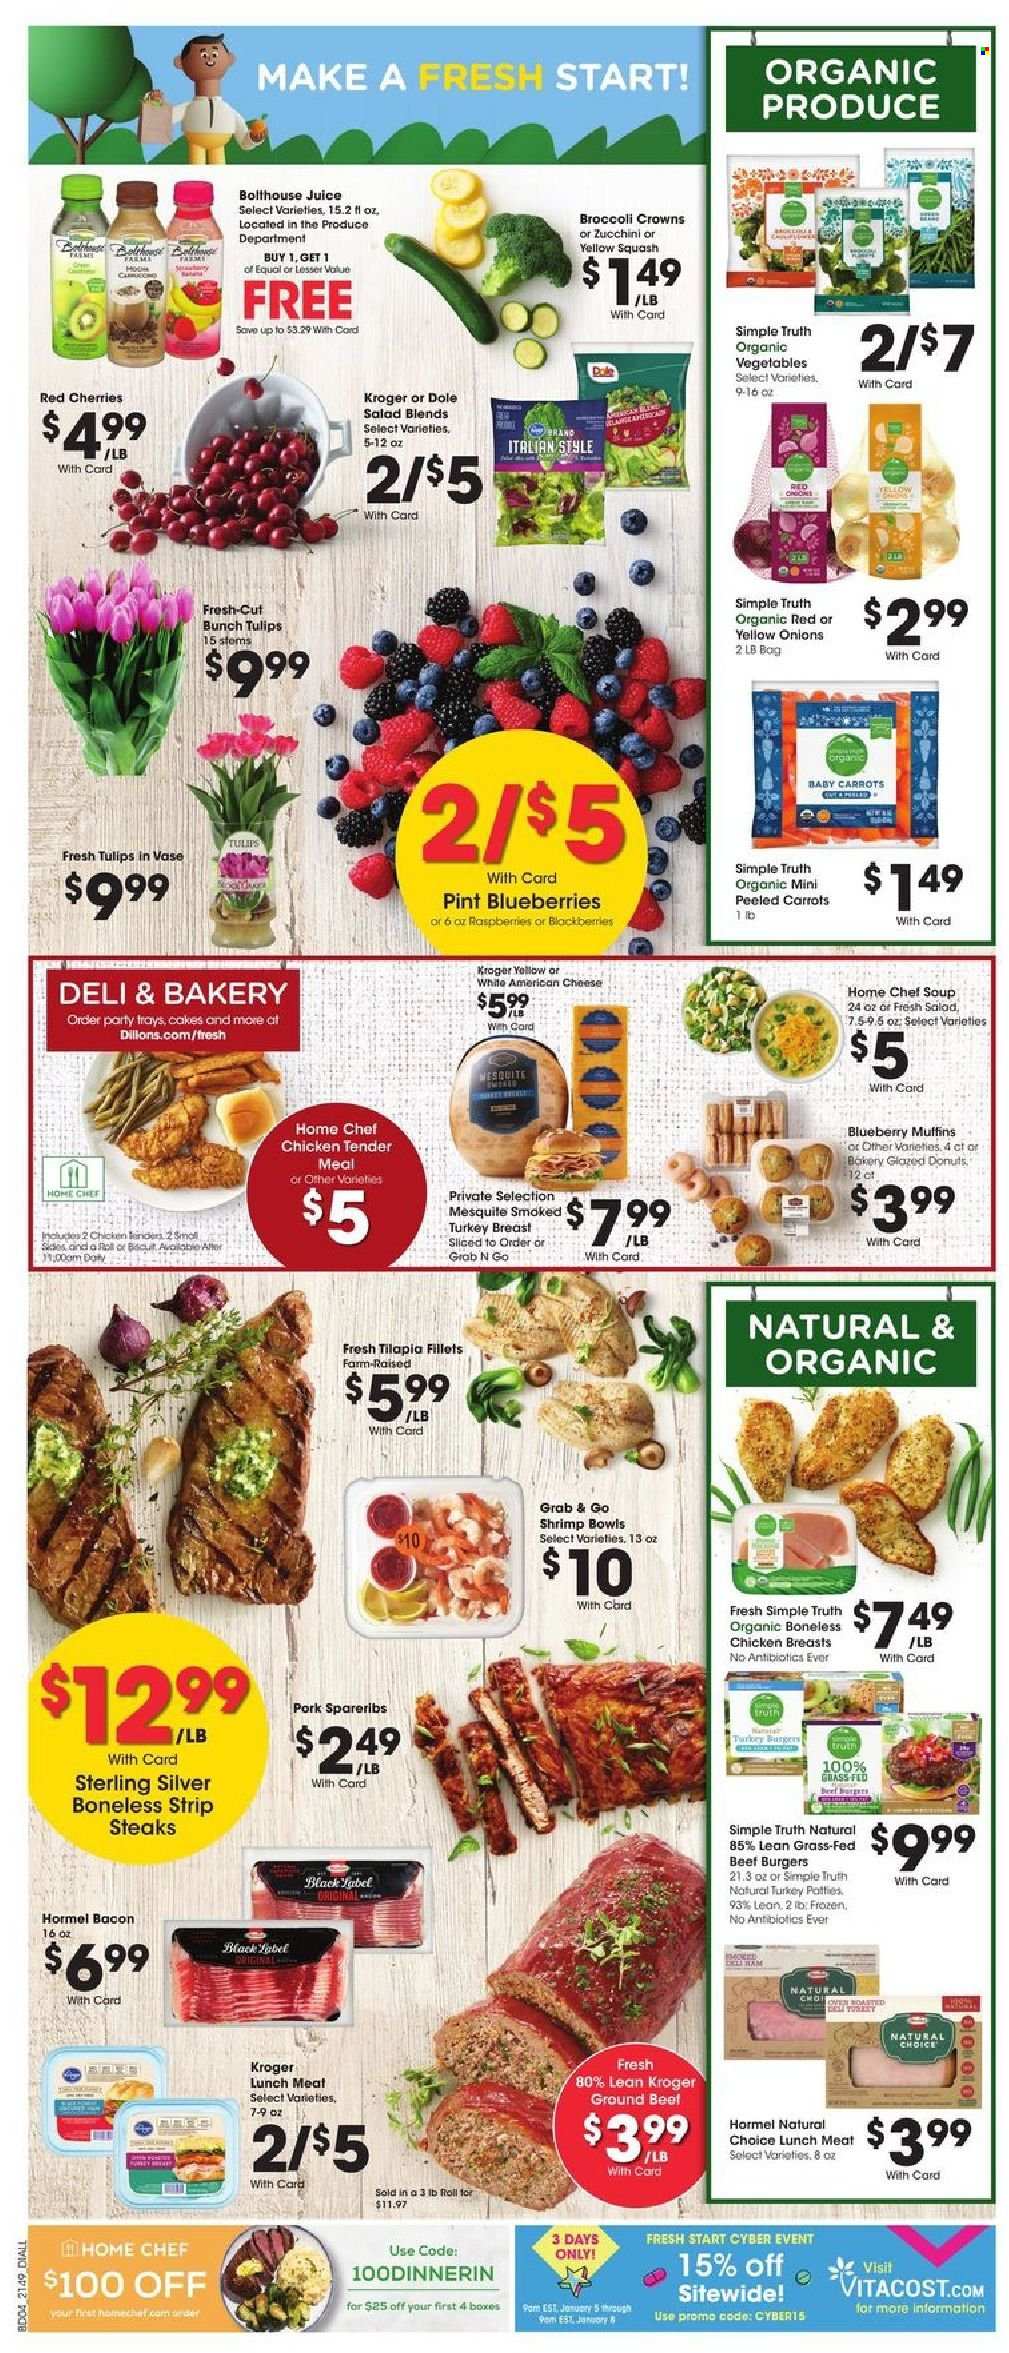 Dillons ad  - 01.05.2022 - 01.11.2022.